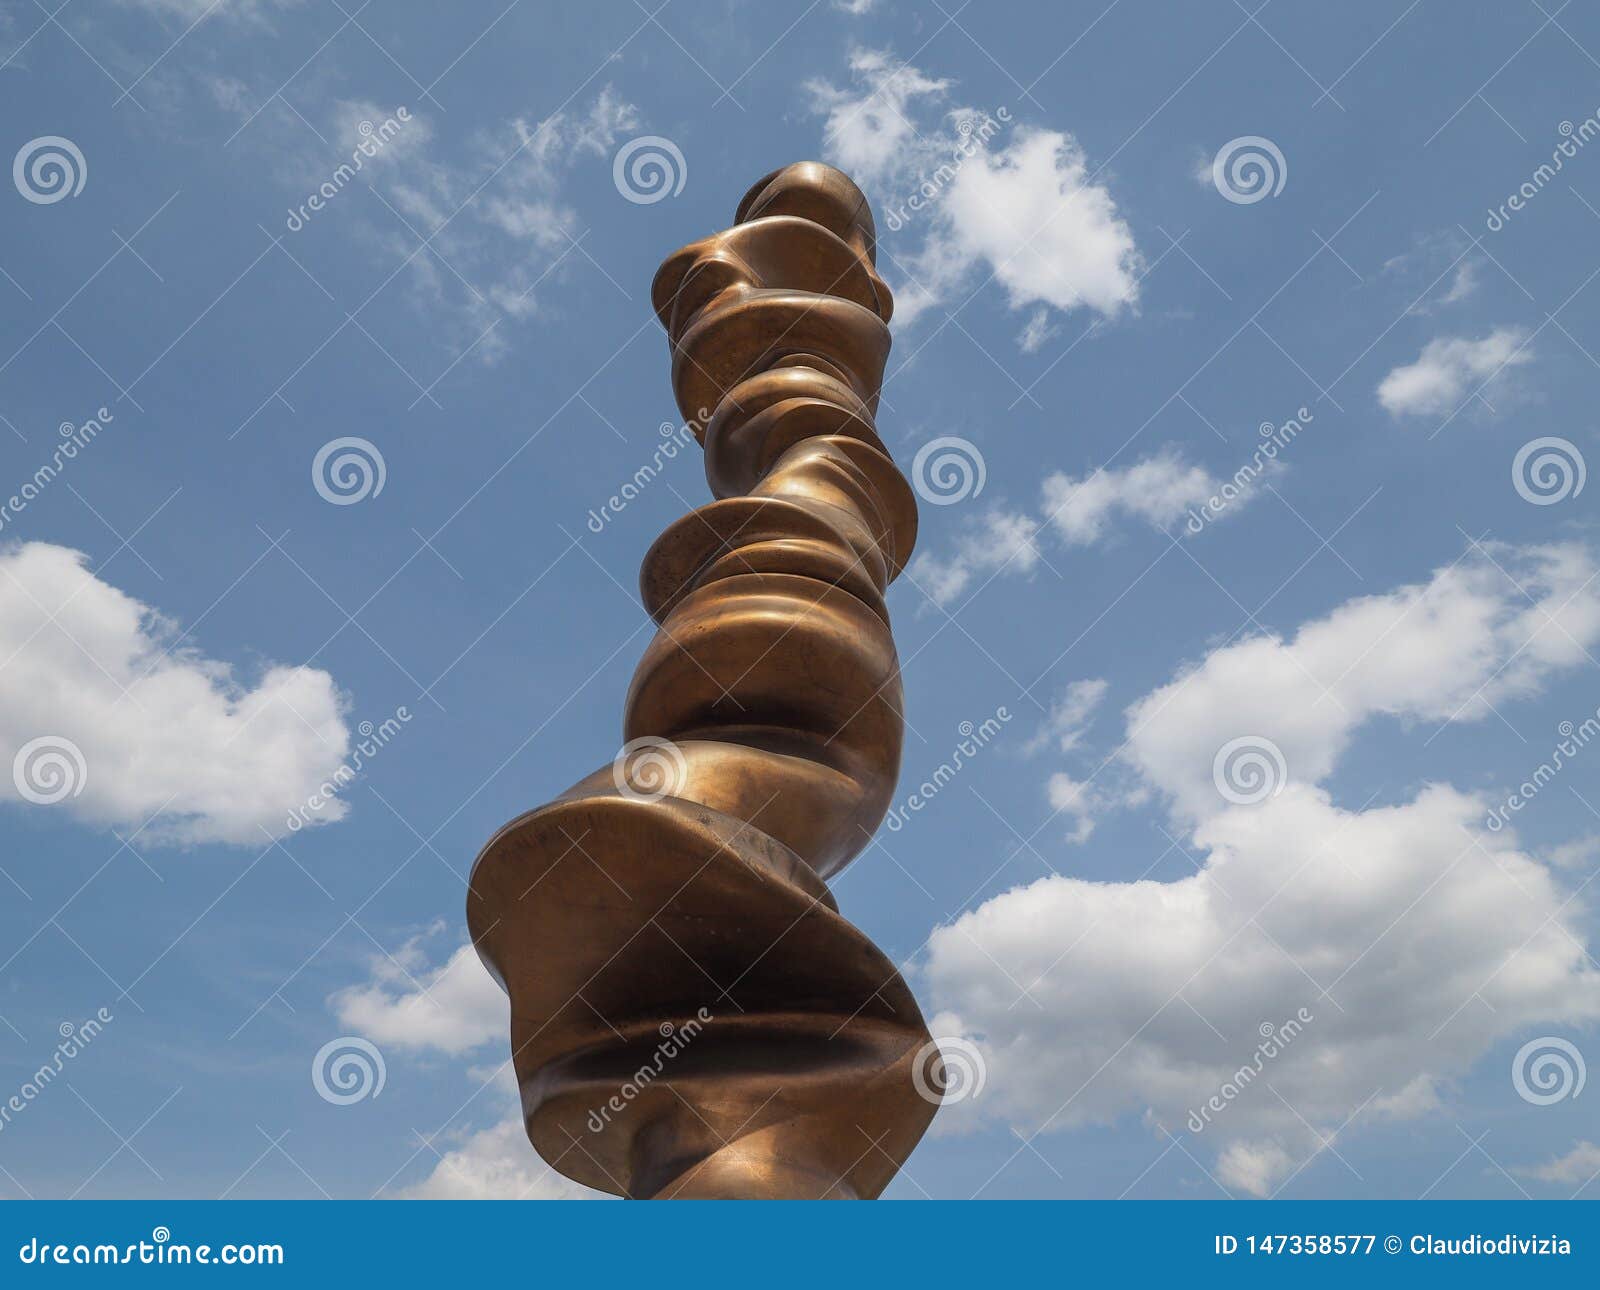 punti di vista (points of view) sculpture by tony cragg in turin